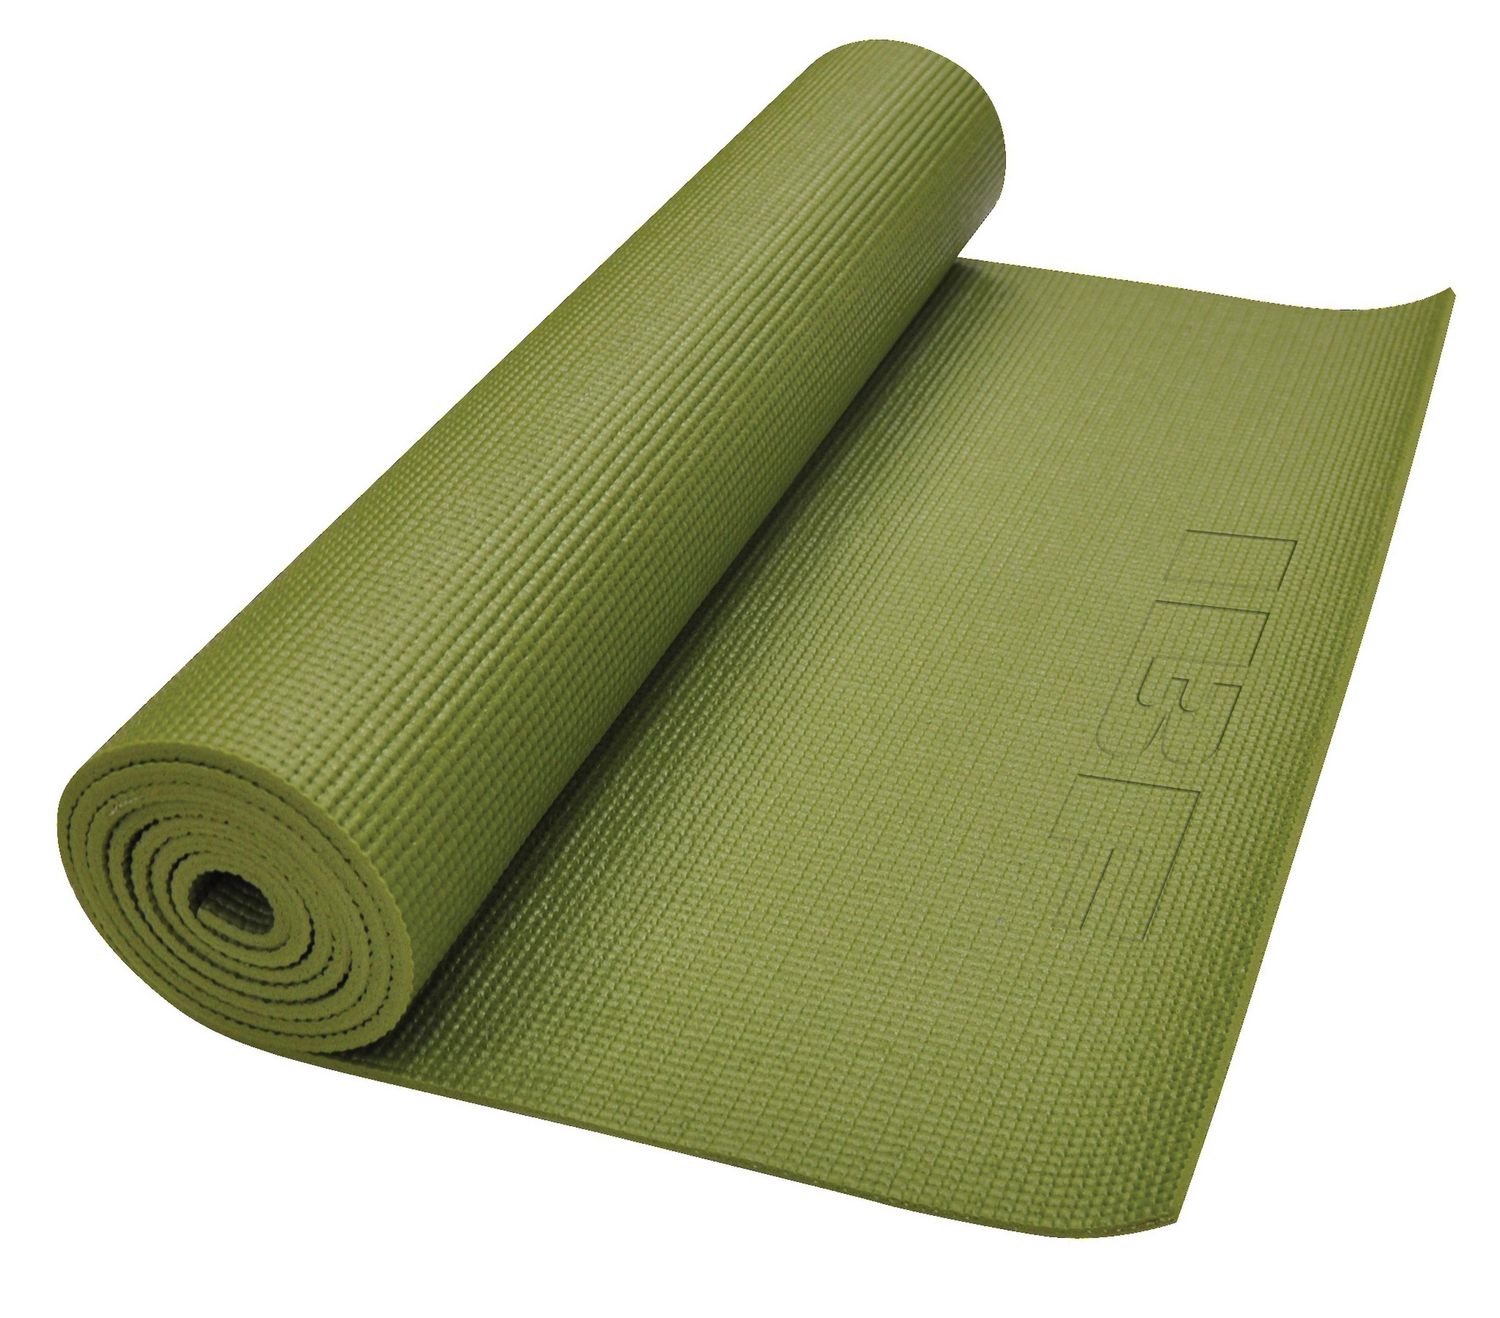 IBF Iron Body Fitness Extra-Thick Yoga Mat - 6 mm (0.24 in.) - Non-Slip  Surface - Ideal Exercise Mat for Yoga, Pilates, Gymnastics, Home Gym - Green  